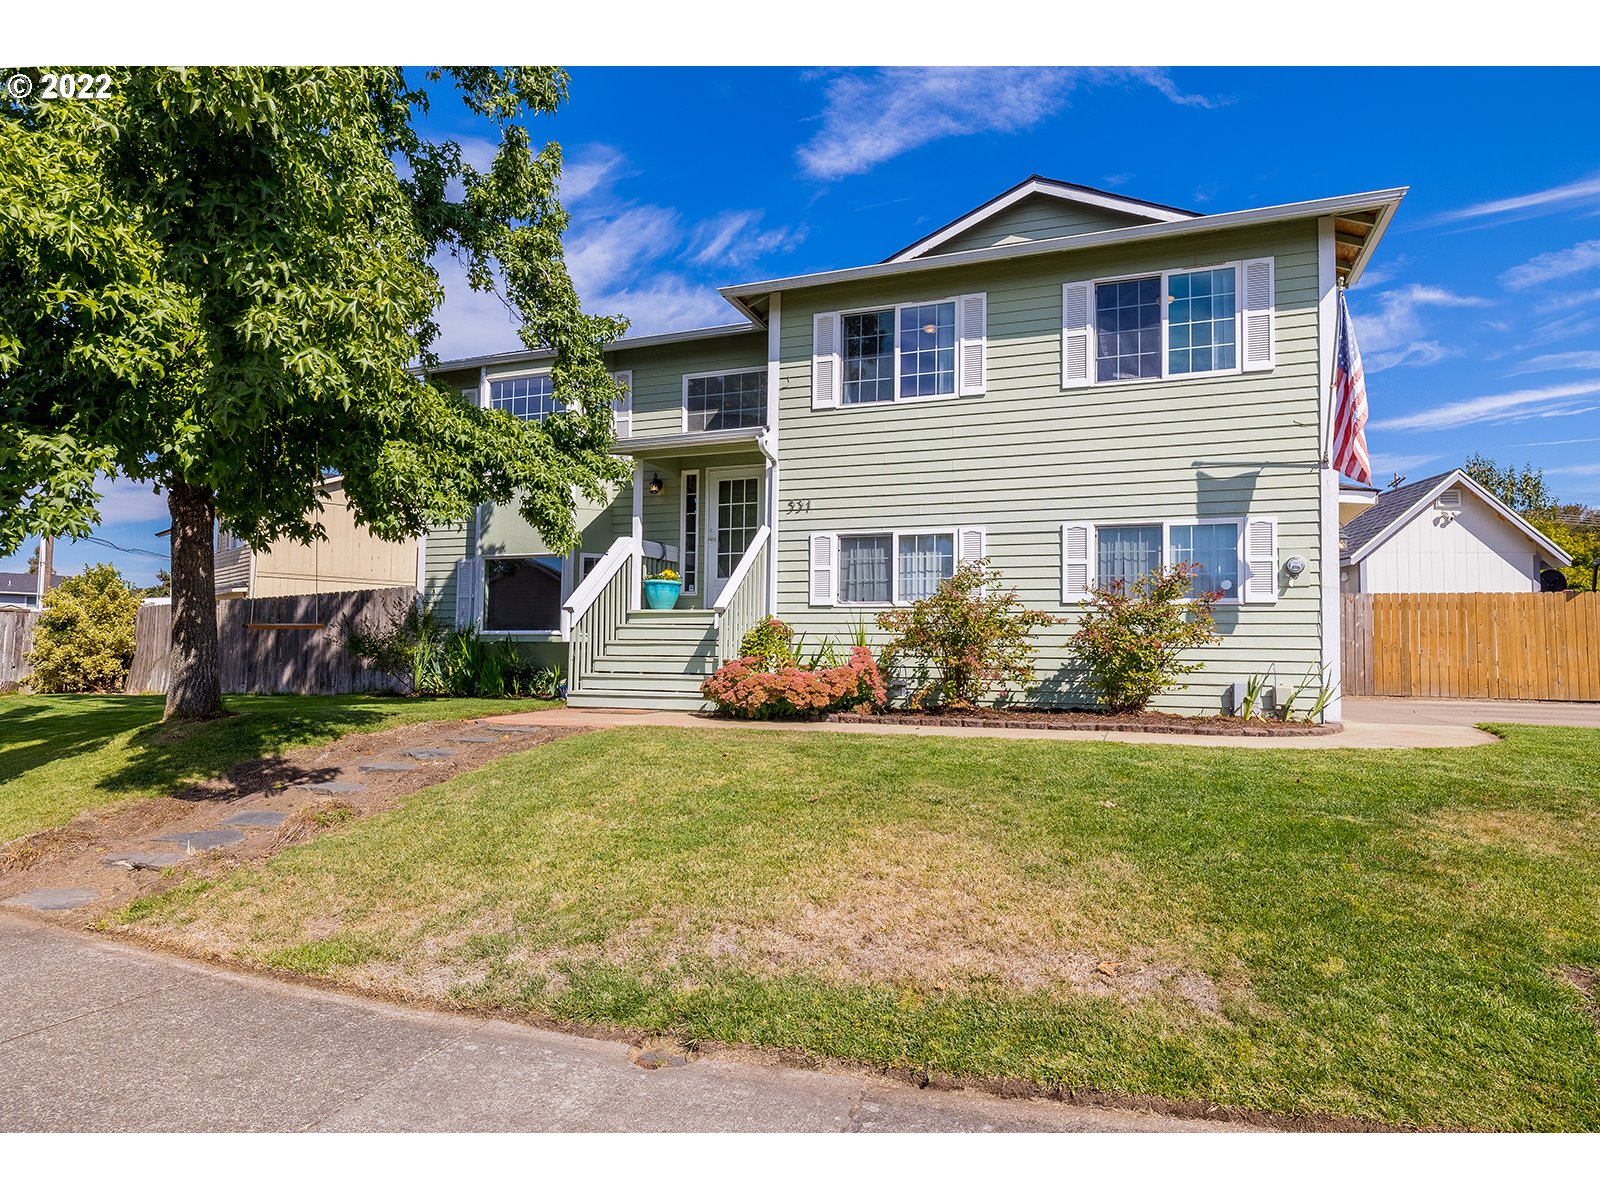 531 S 41ST PL, Springfield, OR 